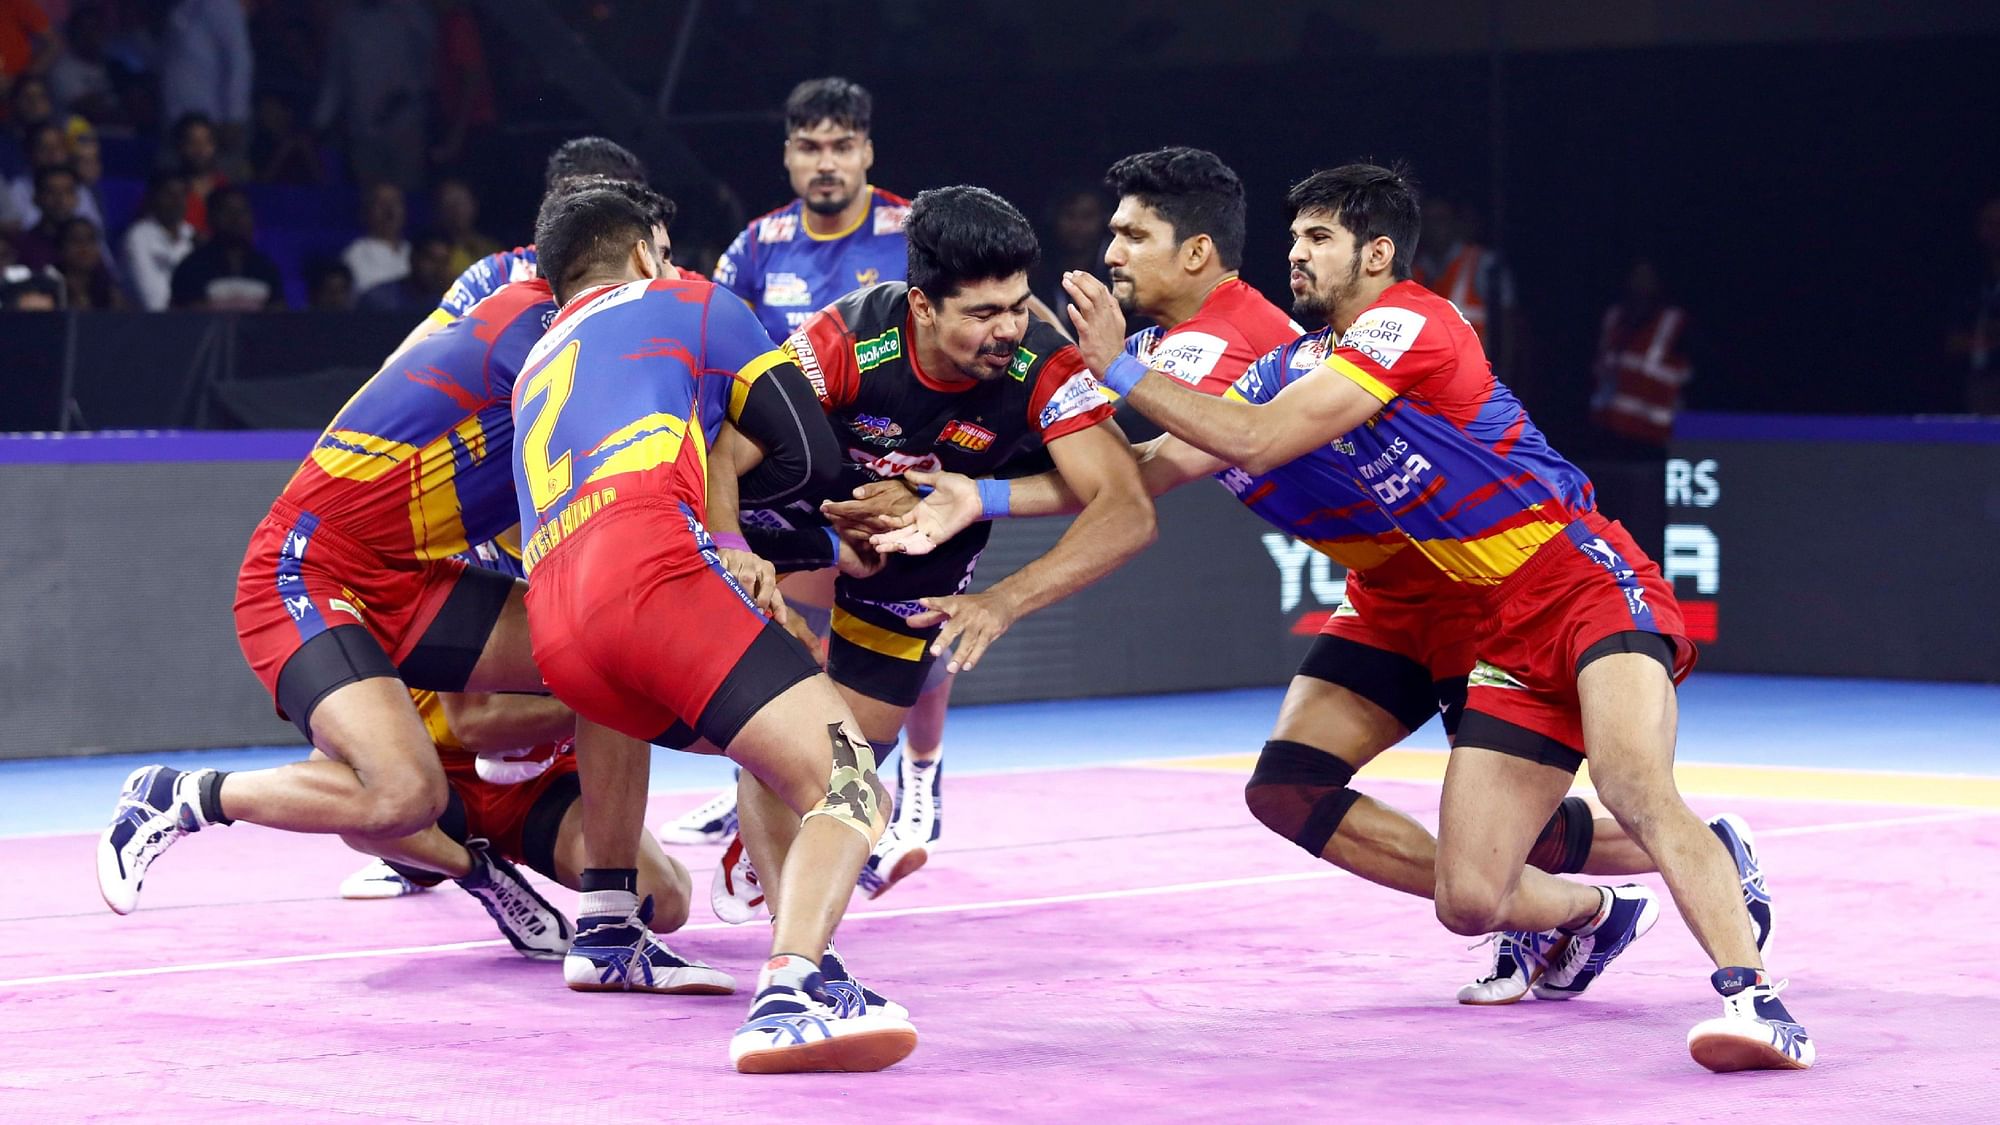 Local boy, Ashu Singh was the standout defender for the team with five tackle points in the match.